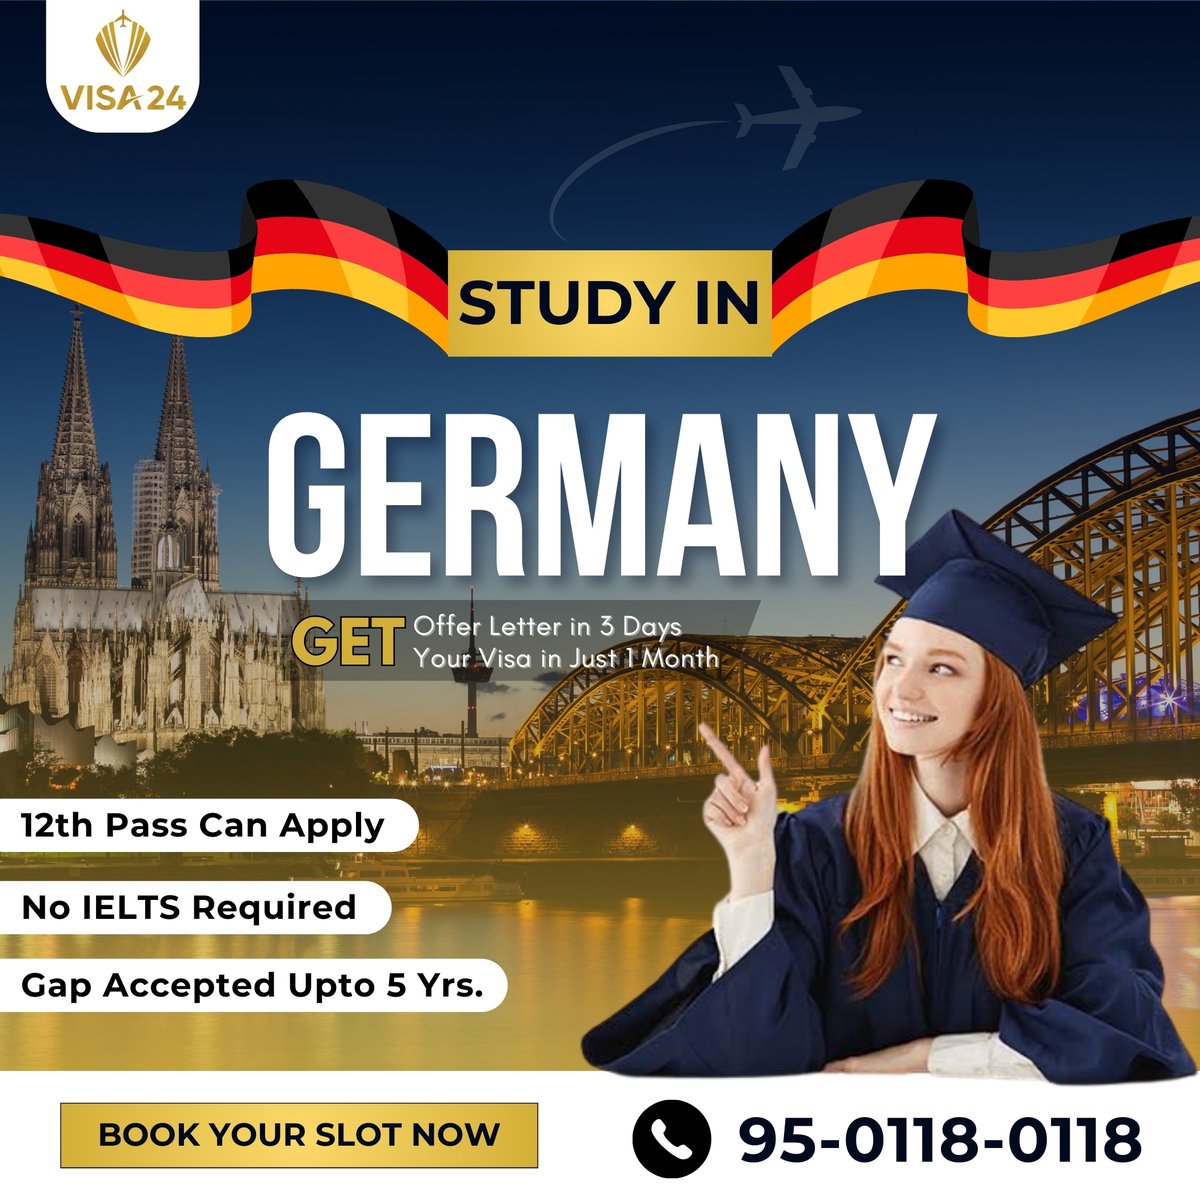 Dreaming of an international education experience? Unlock your potential by studying in Germany!
Contact us at 9501180118 to explore world-class universities, affordable tuition fees, and an enriching cultural journey. 

#StudyInGermany #visa24services